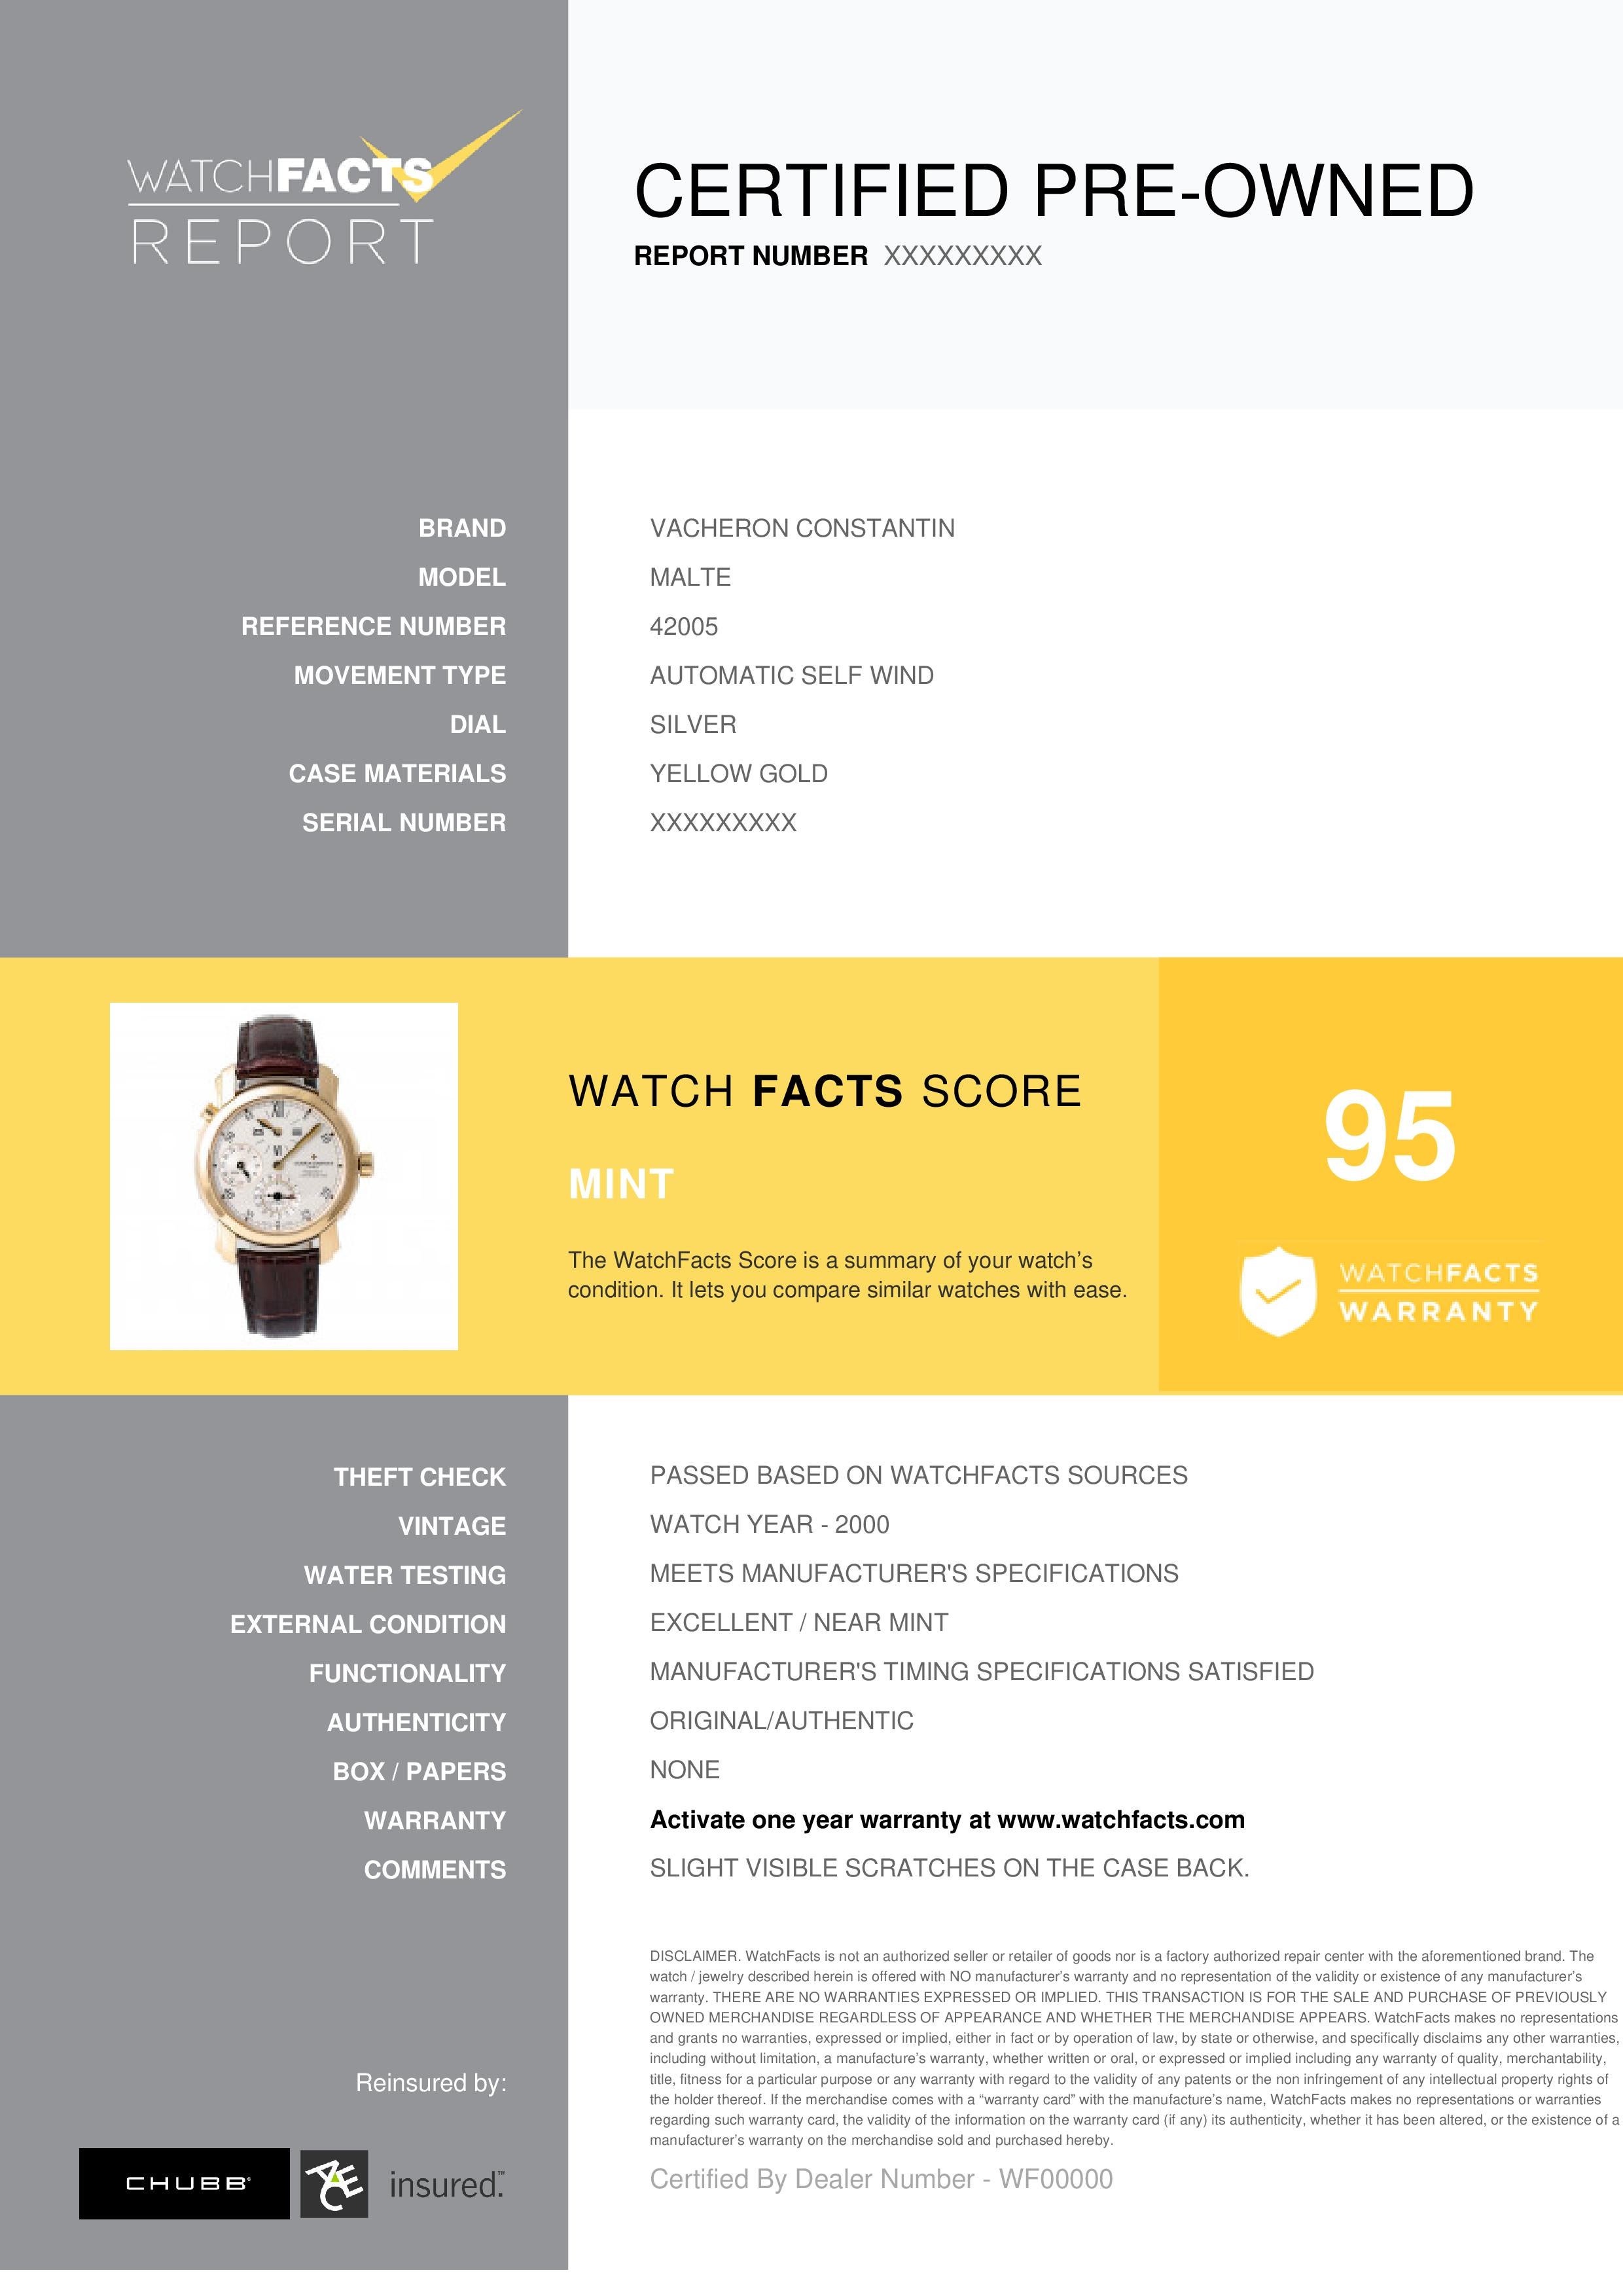 Vacheron Constantin Malte Reference #: 42005. Mens Automatic Self Wind Watch Yellow Gold Silver 38 MM. Verified and Certified by WatchFacts. 1 year warranty offered by WatchFacts.
